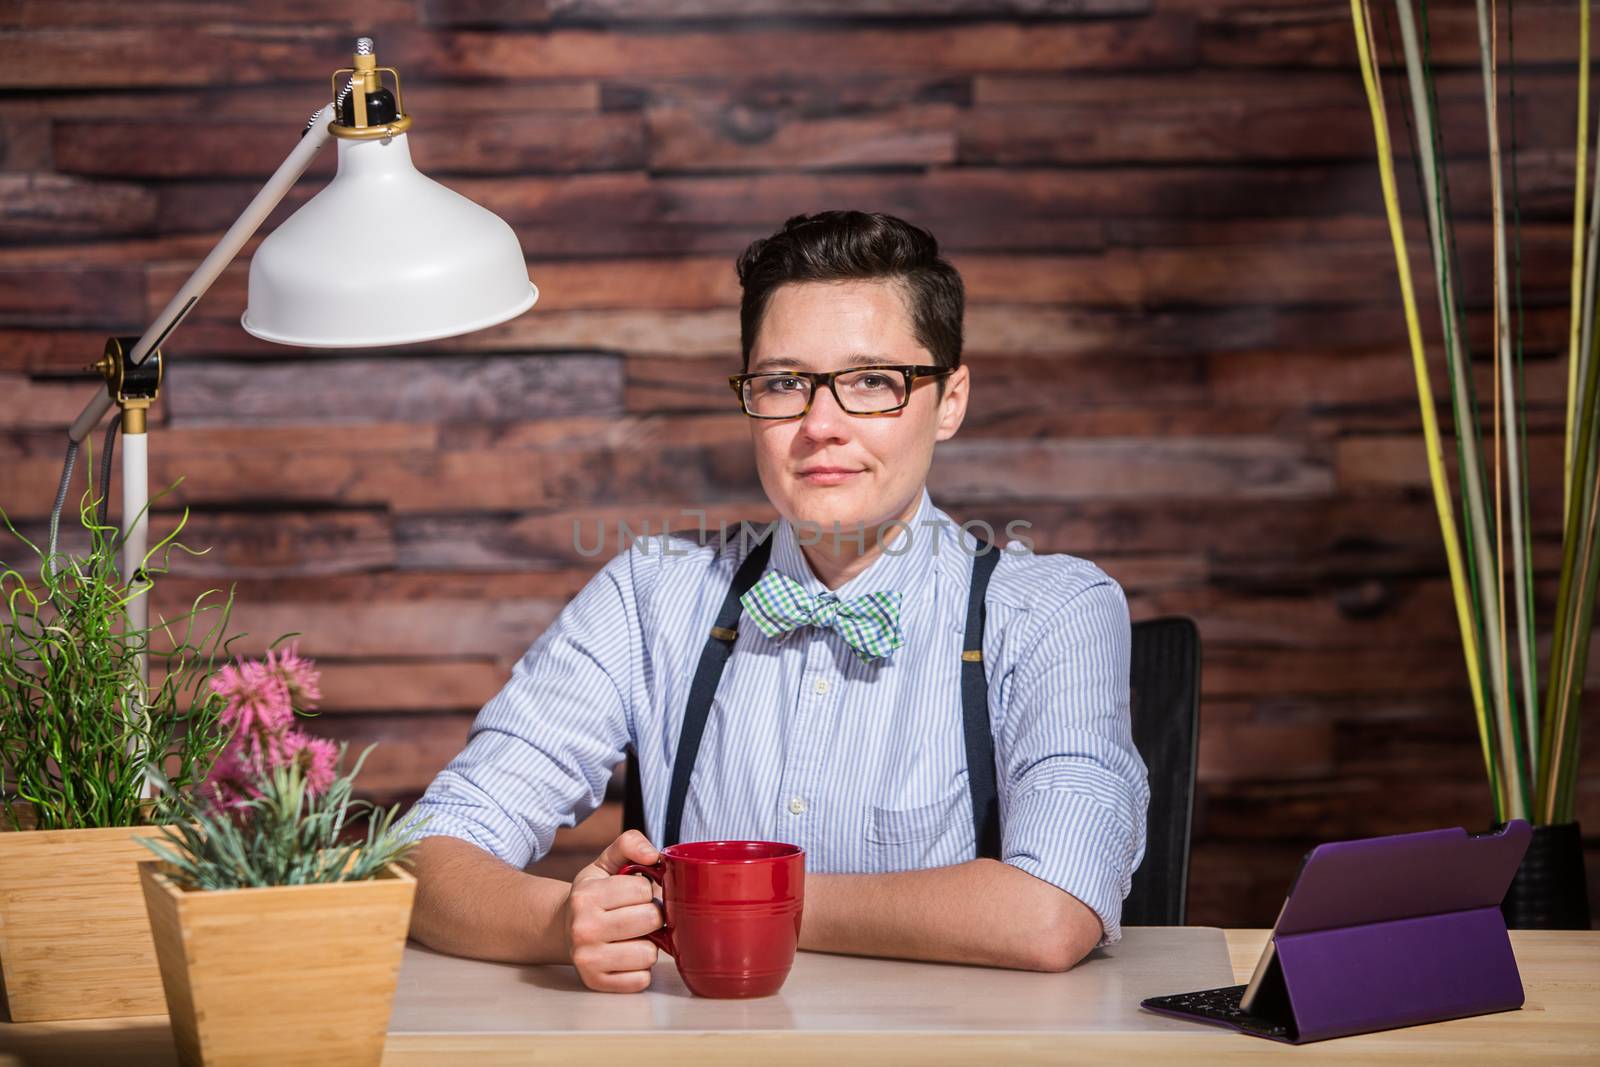 Confident Female in Bowtie with Mug by Creatista